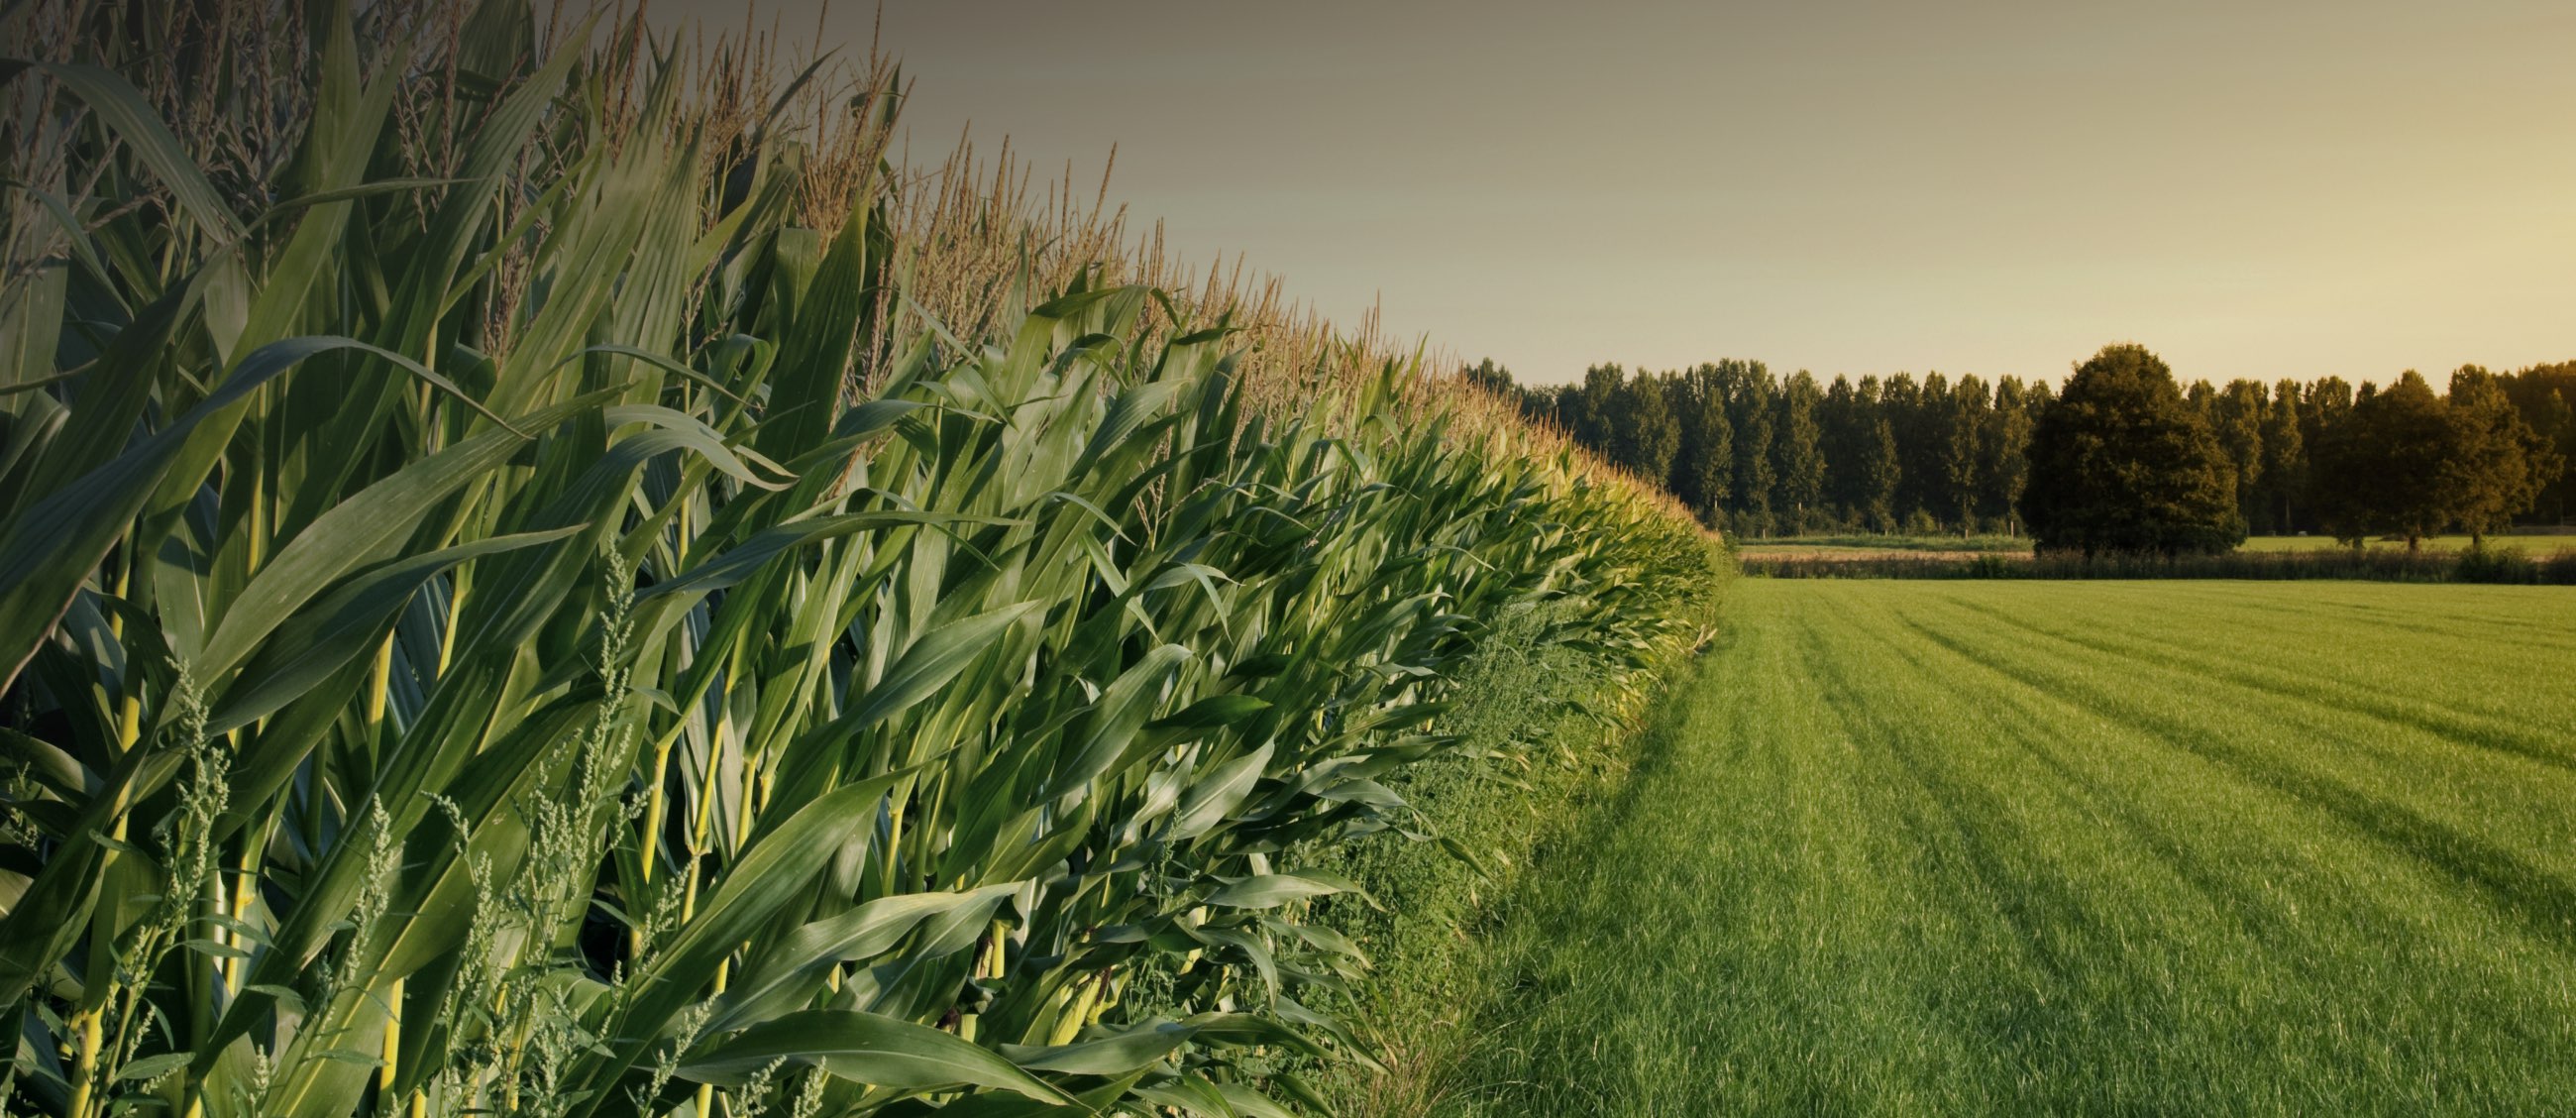 Field of corn crops with trees in the background